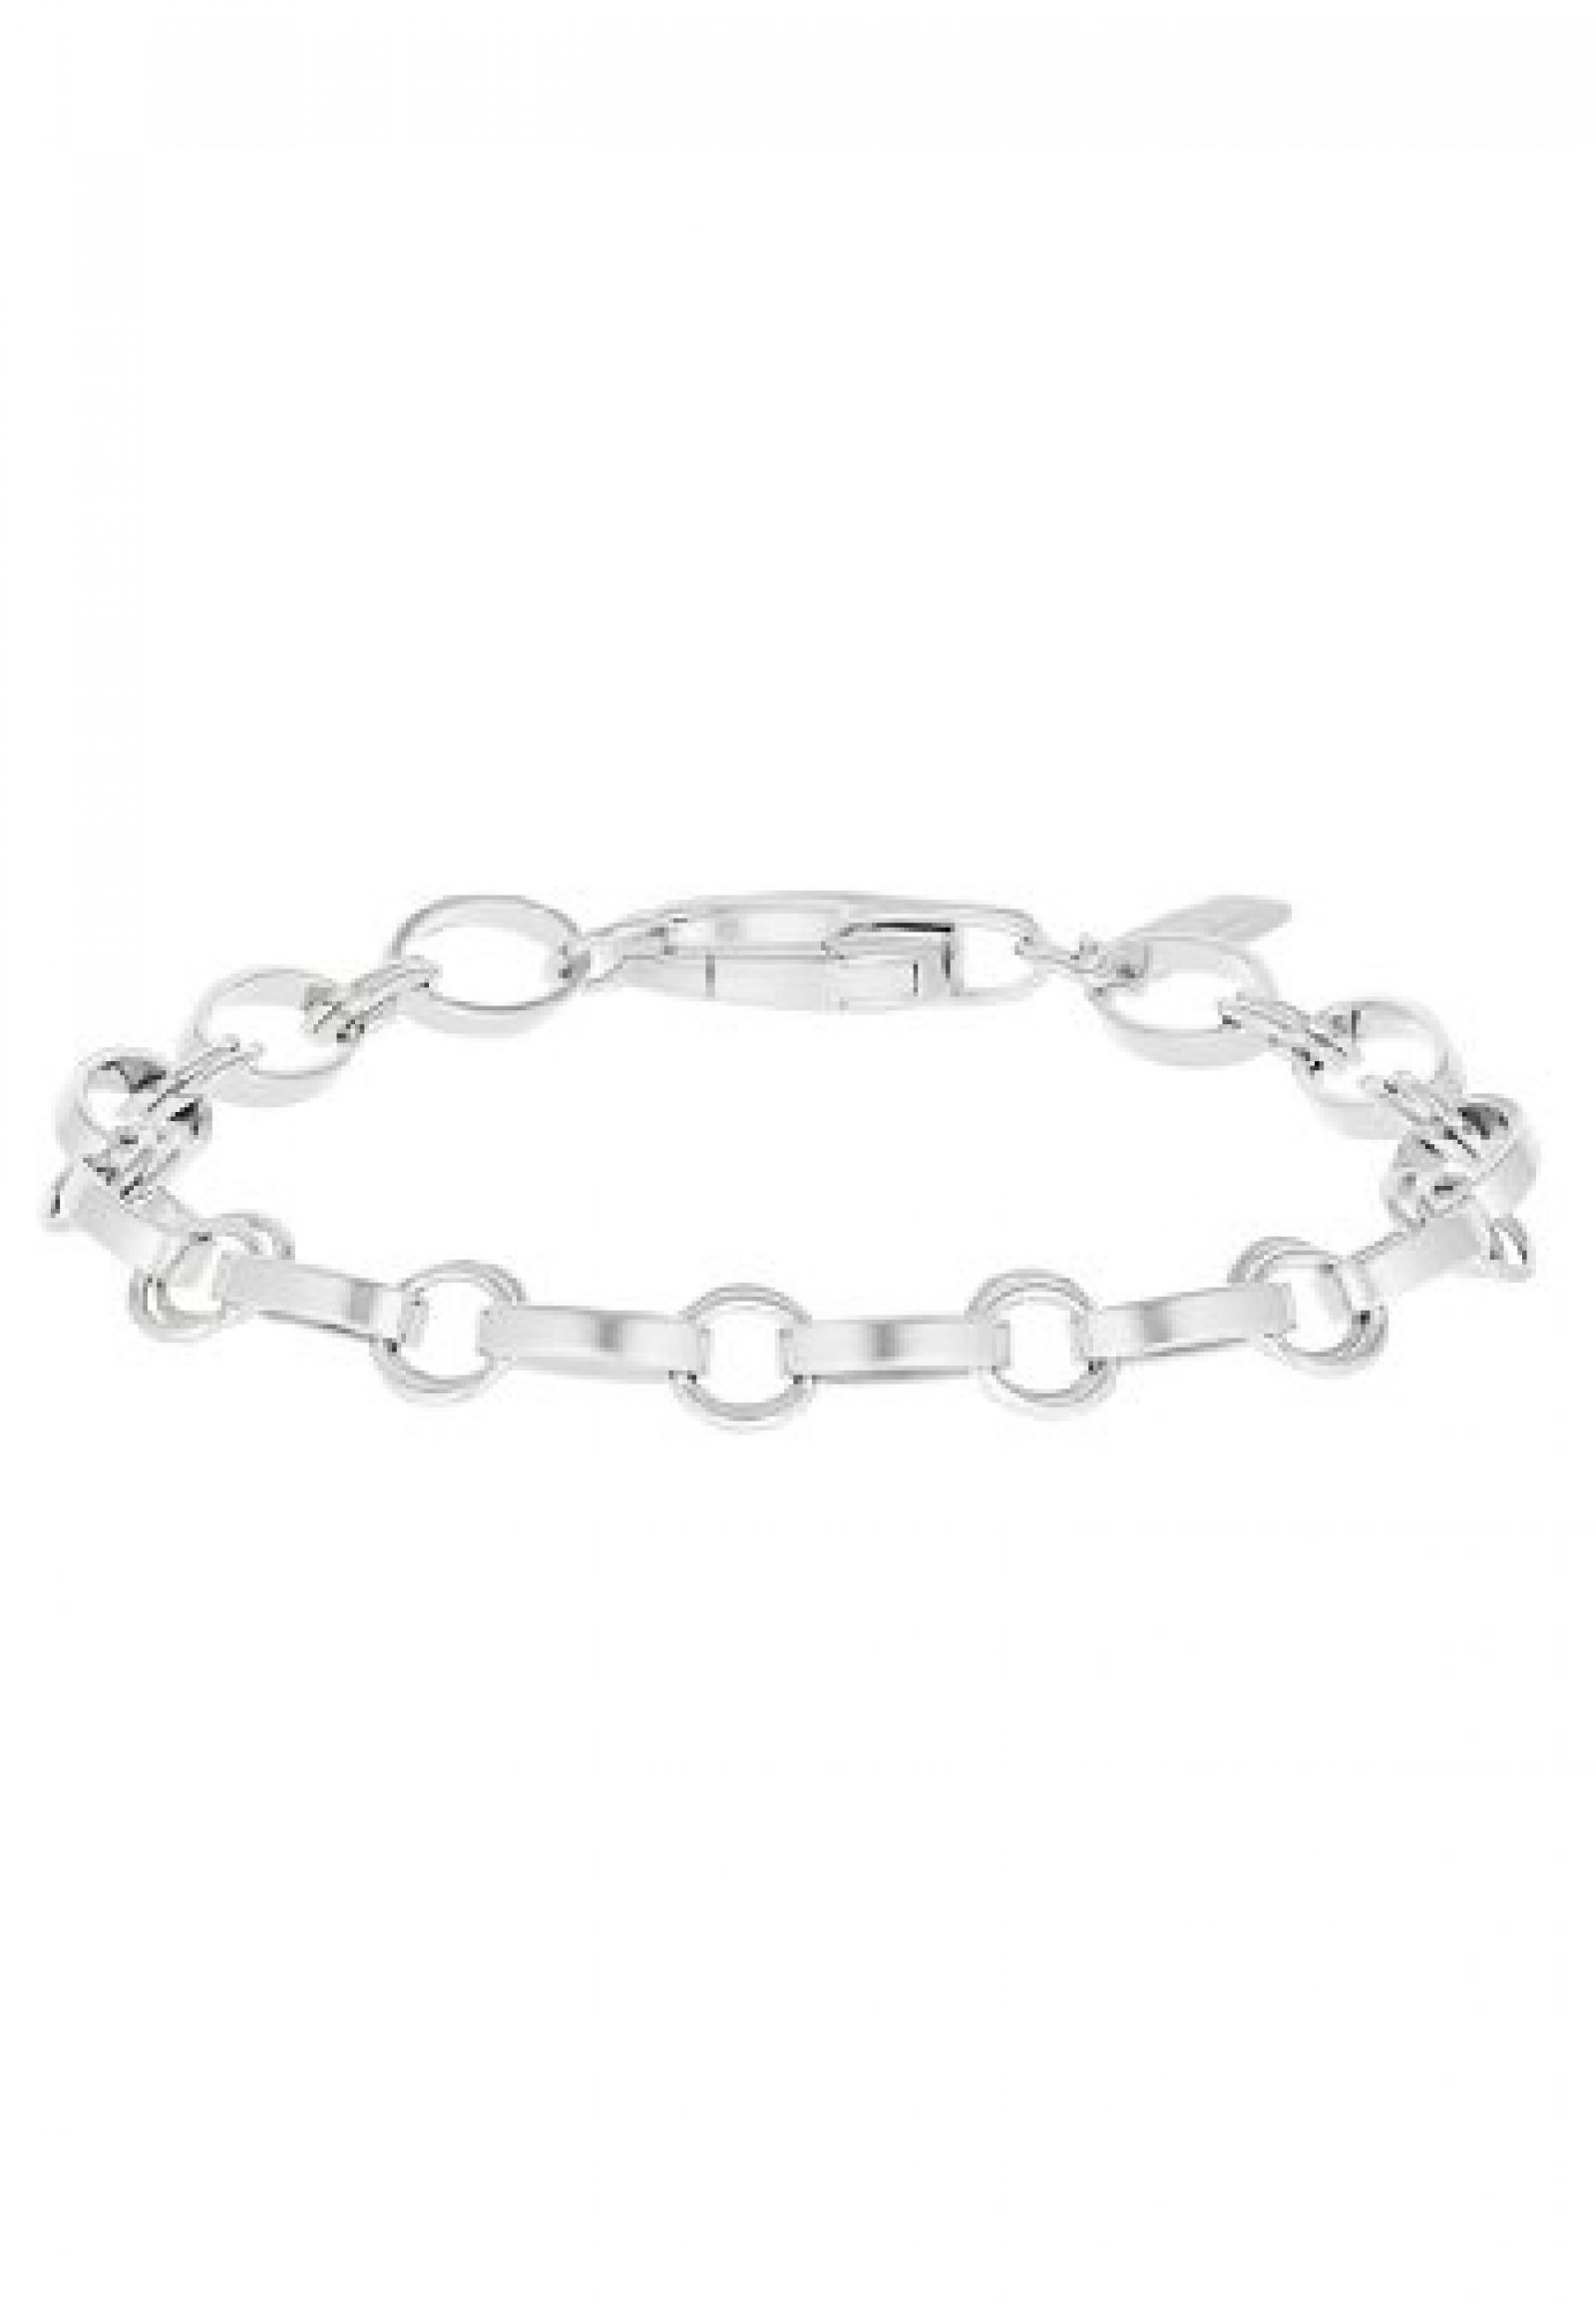 JETTE Charms Damen-Armband CHARM 925er Silber silber, One Size 